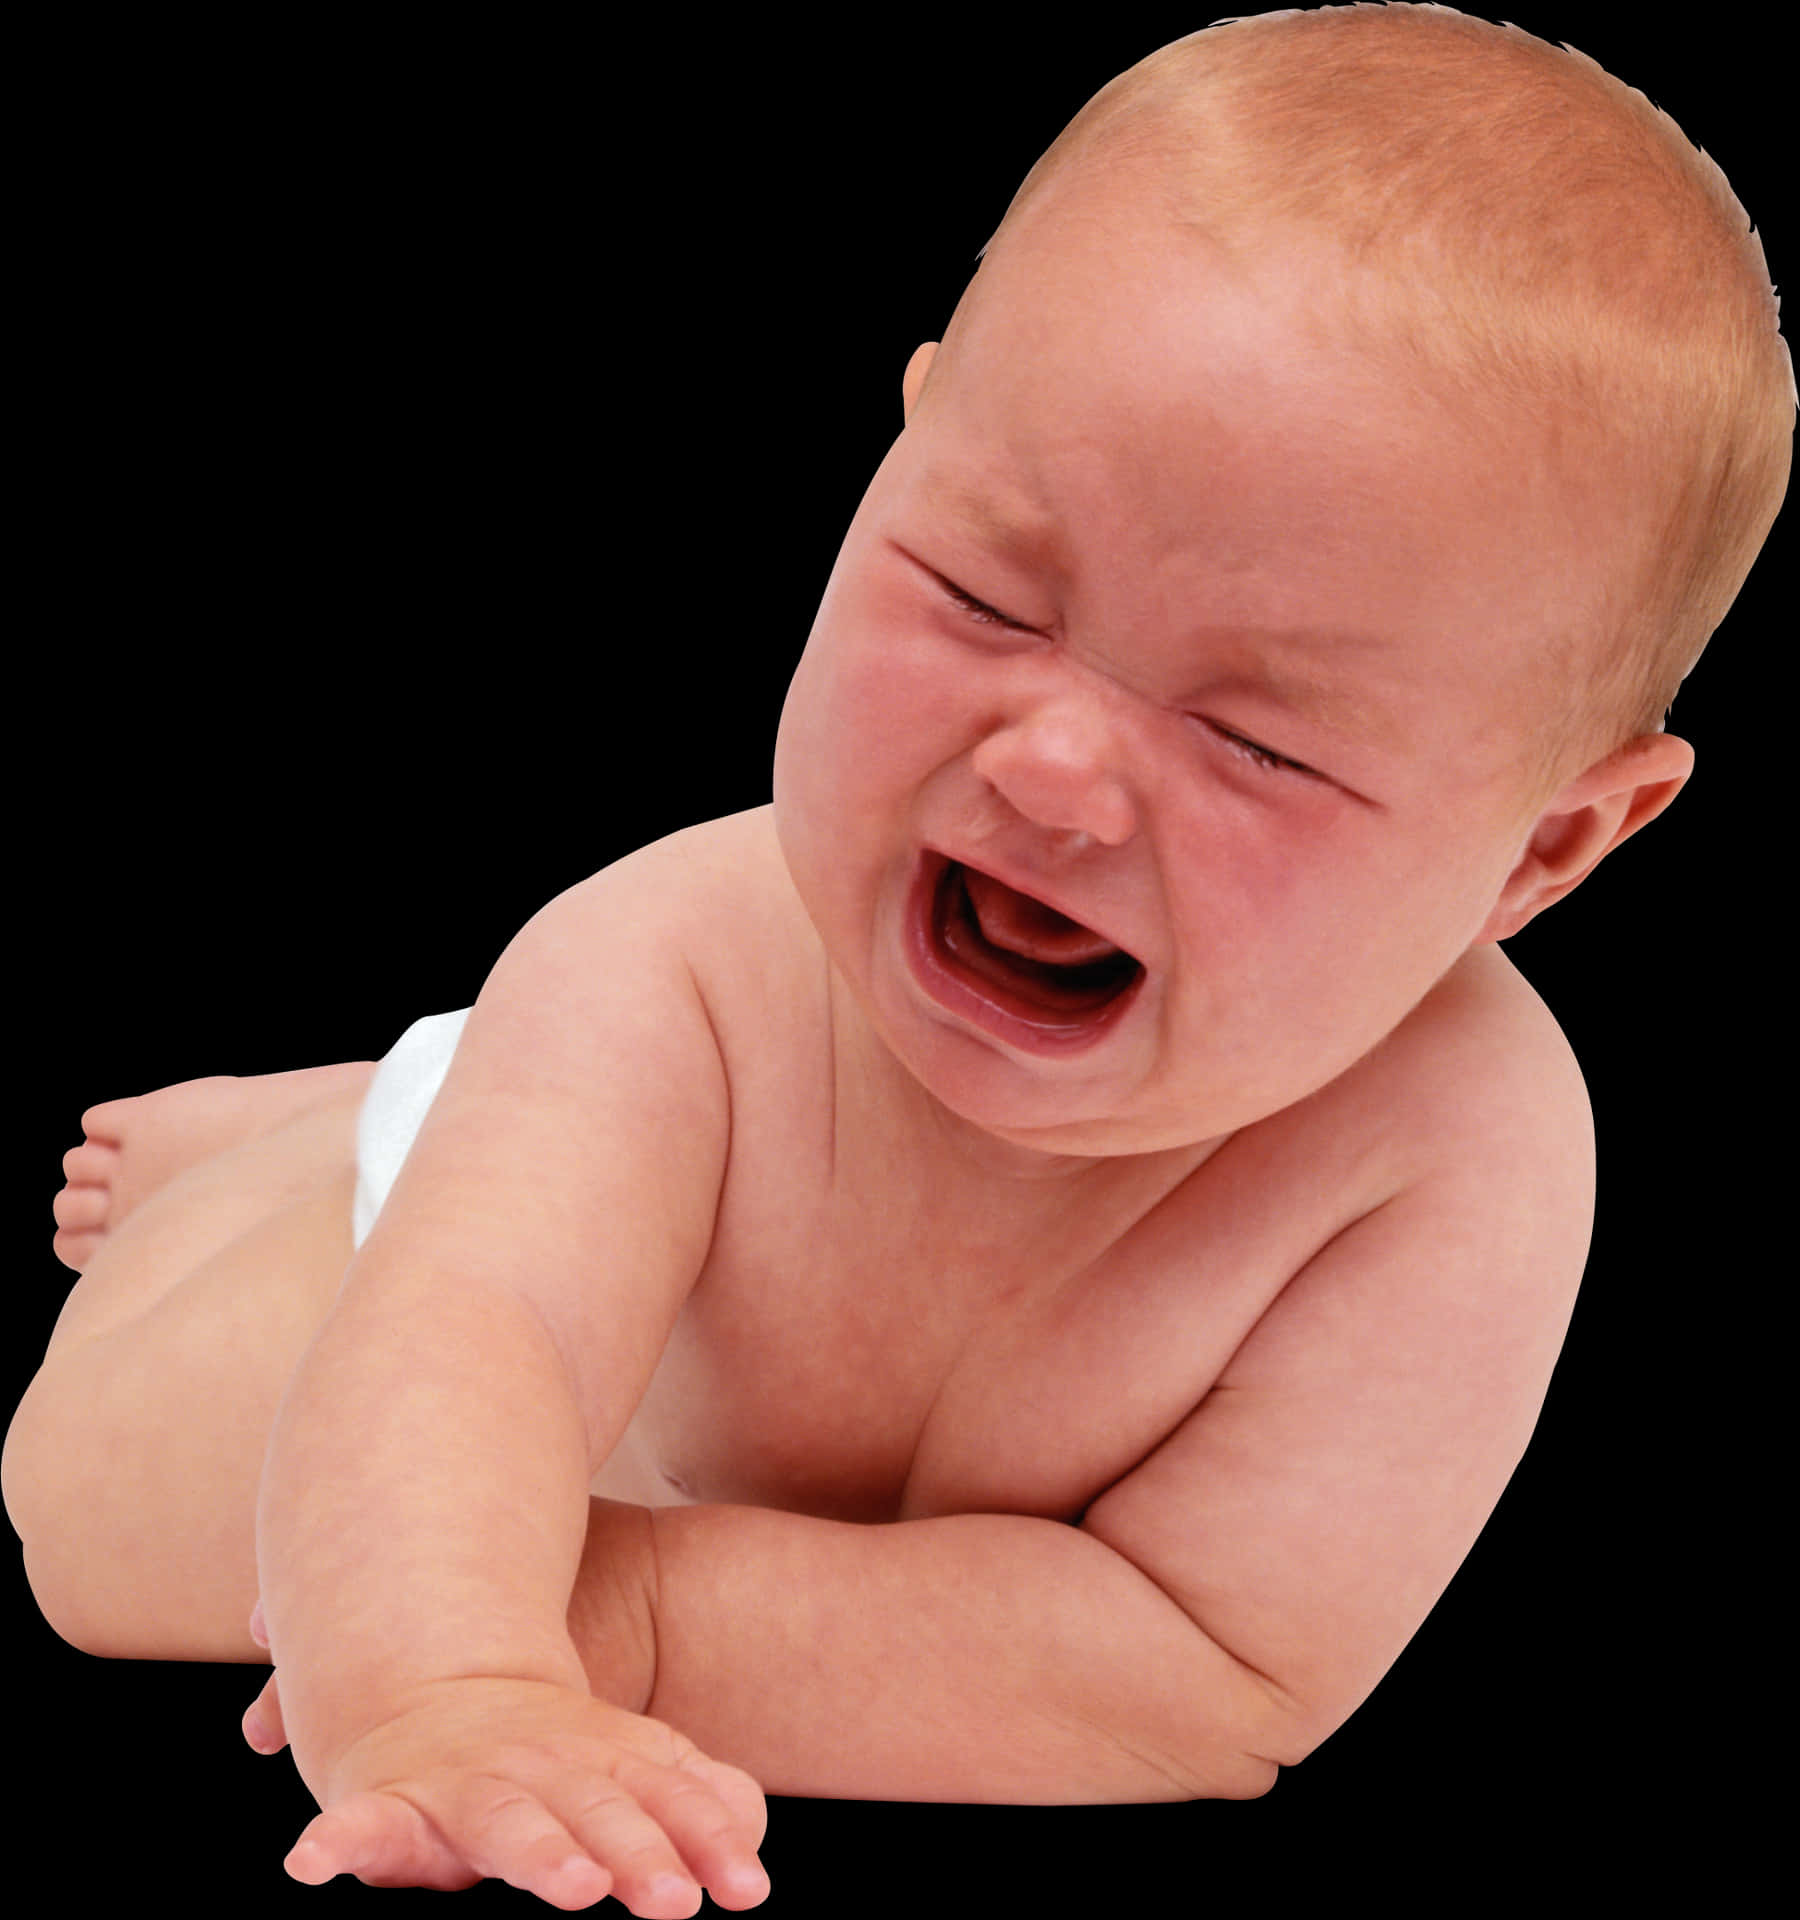 Crying Newborn Baby PNG image